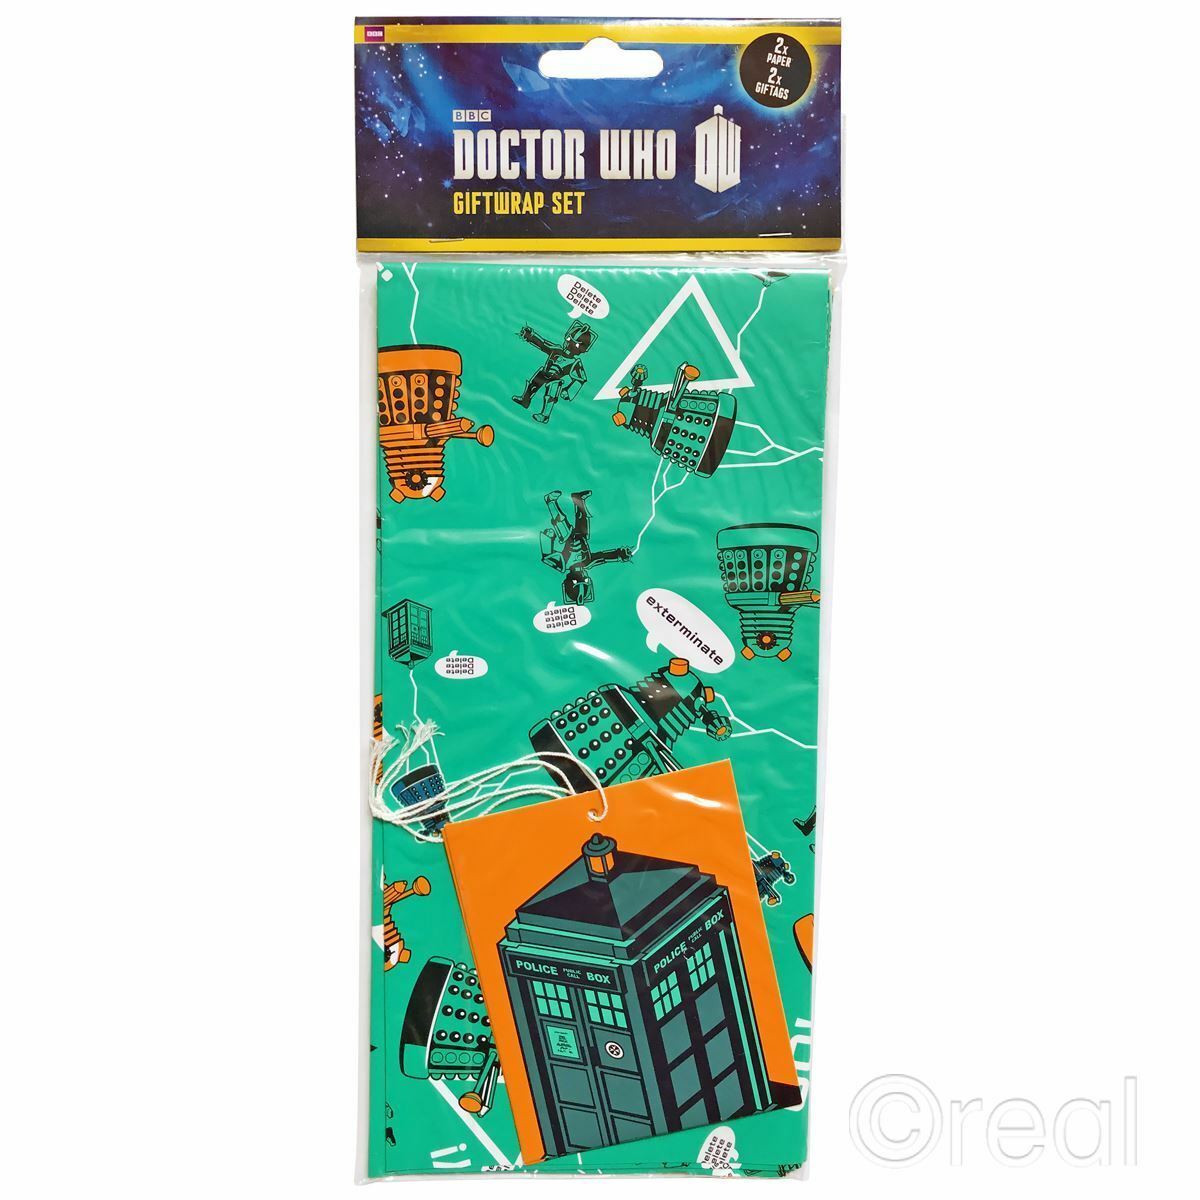 10 Doctor Who Gift Wrap Sets Birthday Tags Wrapping Paper TARDIS Official